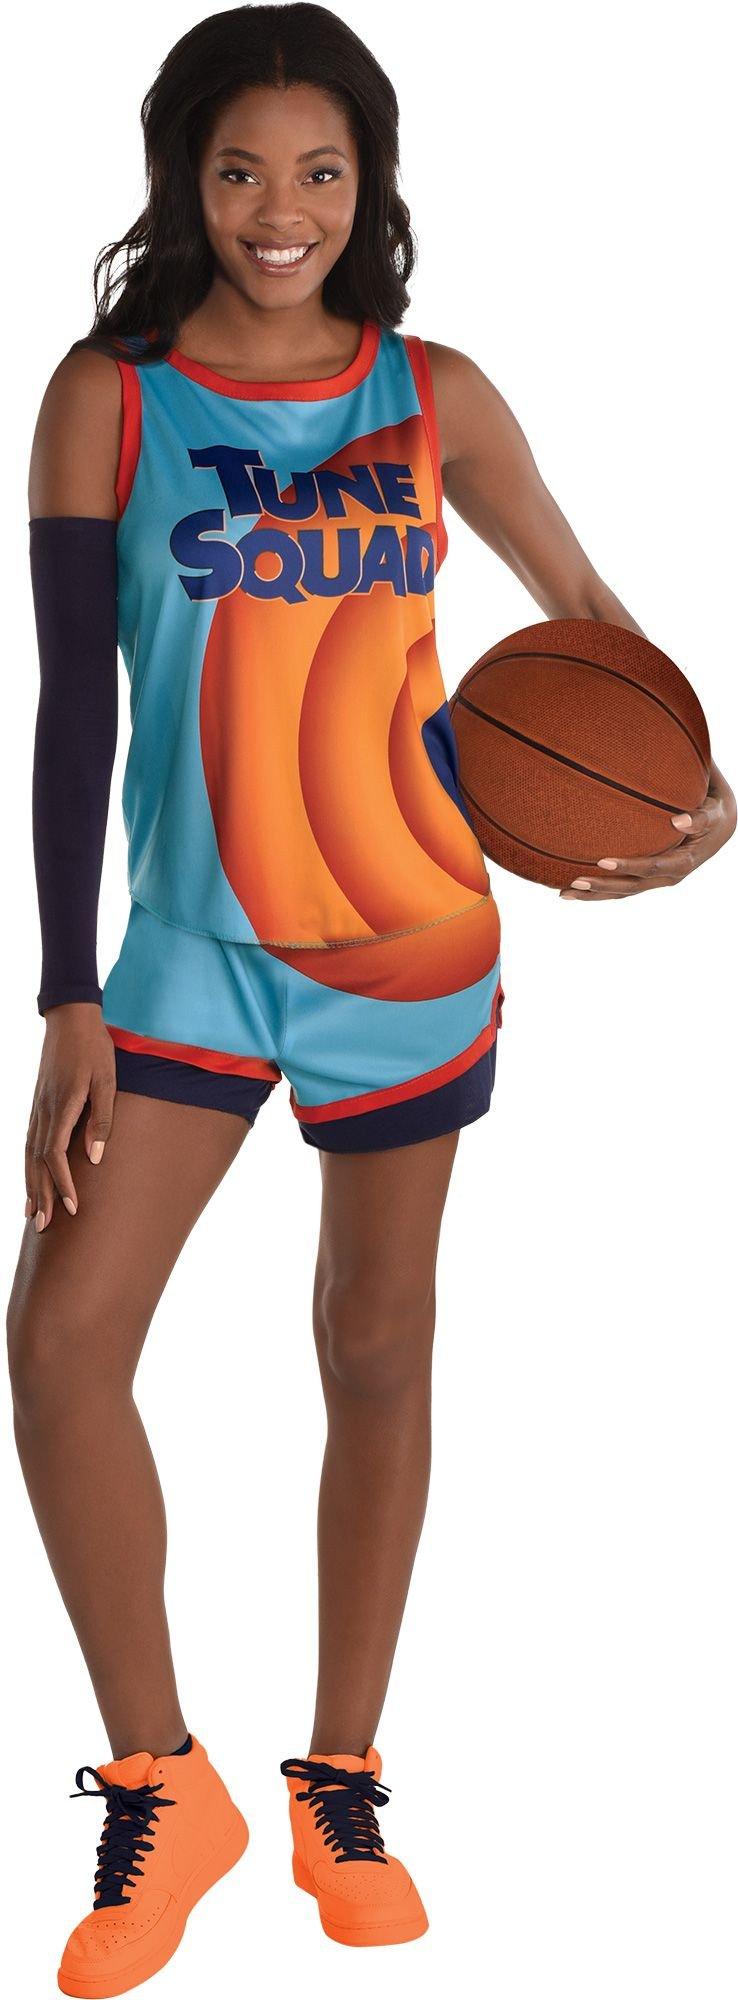 Amscan Tune Squad Uniform Halloween Costume for Women, Space Jam 2, Includes Top, Shorts and Arm Band